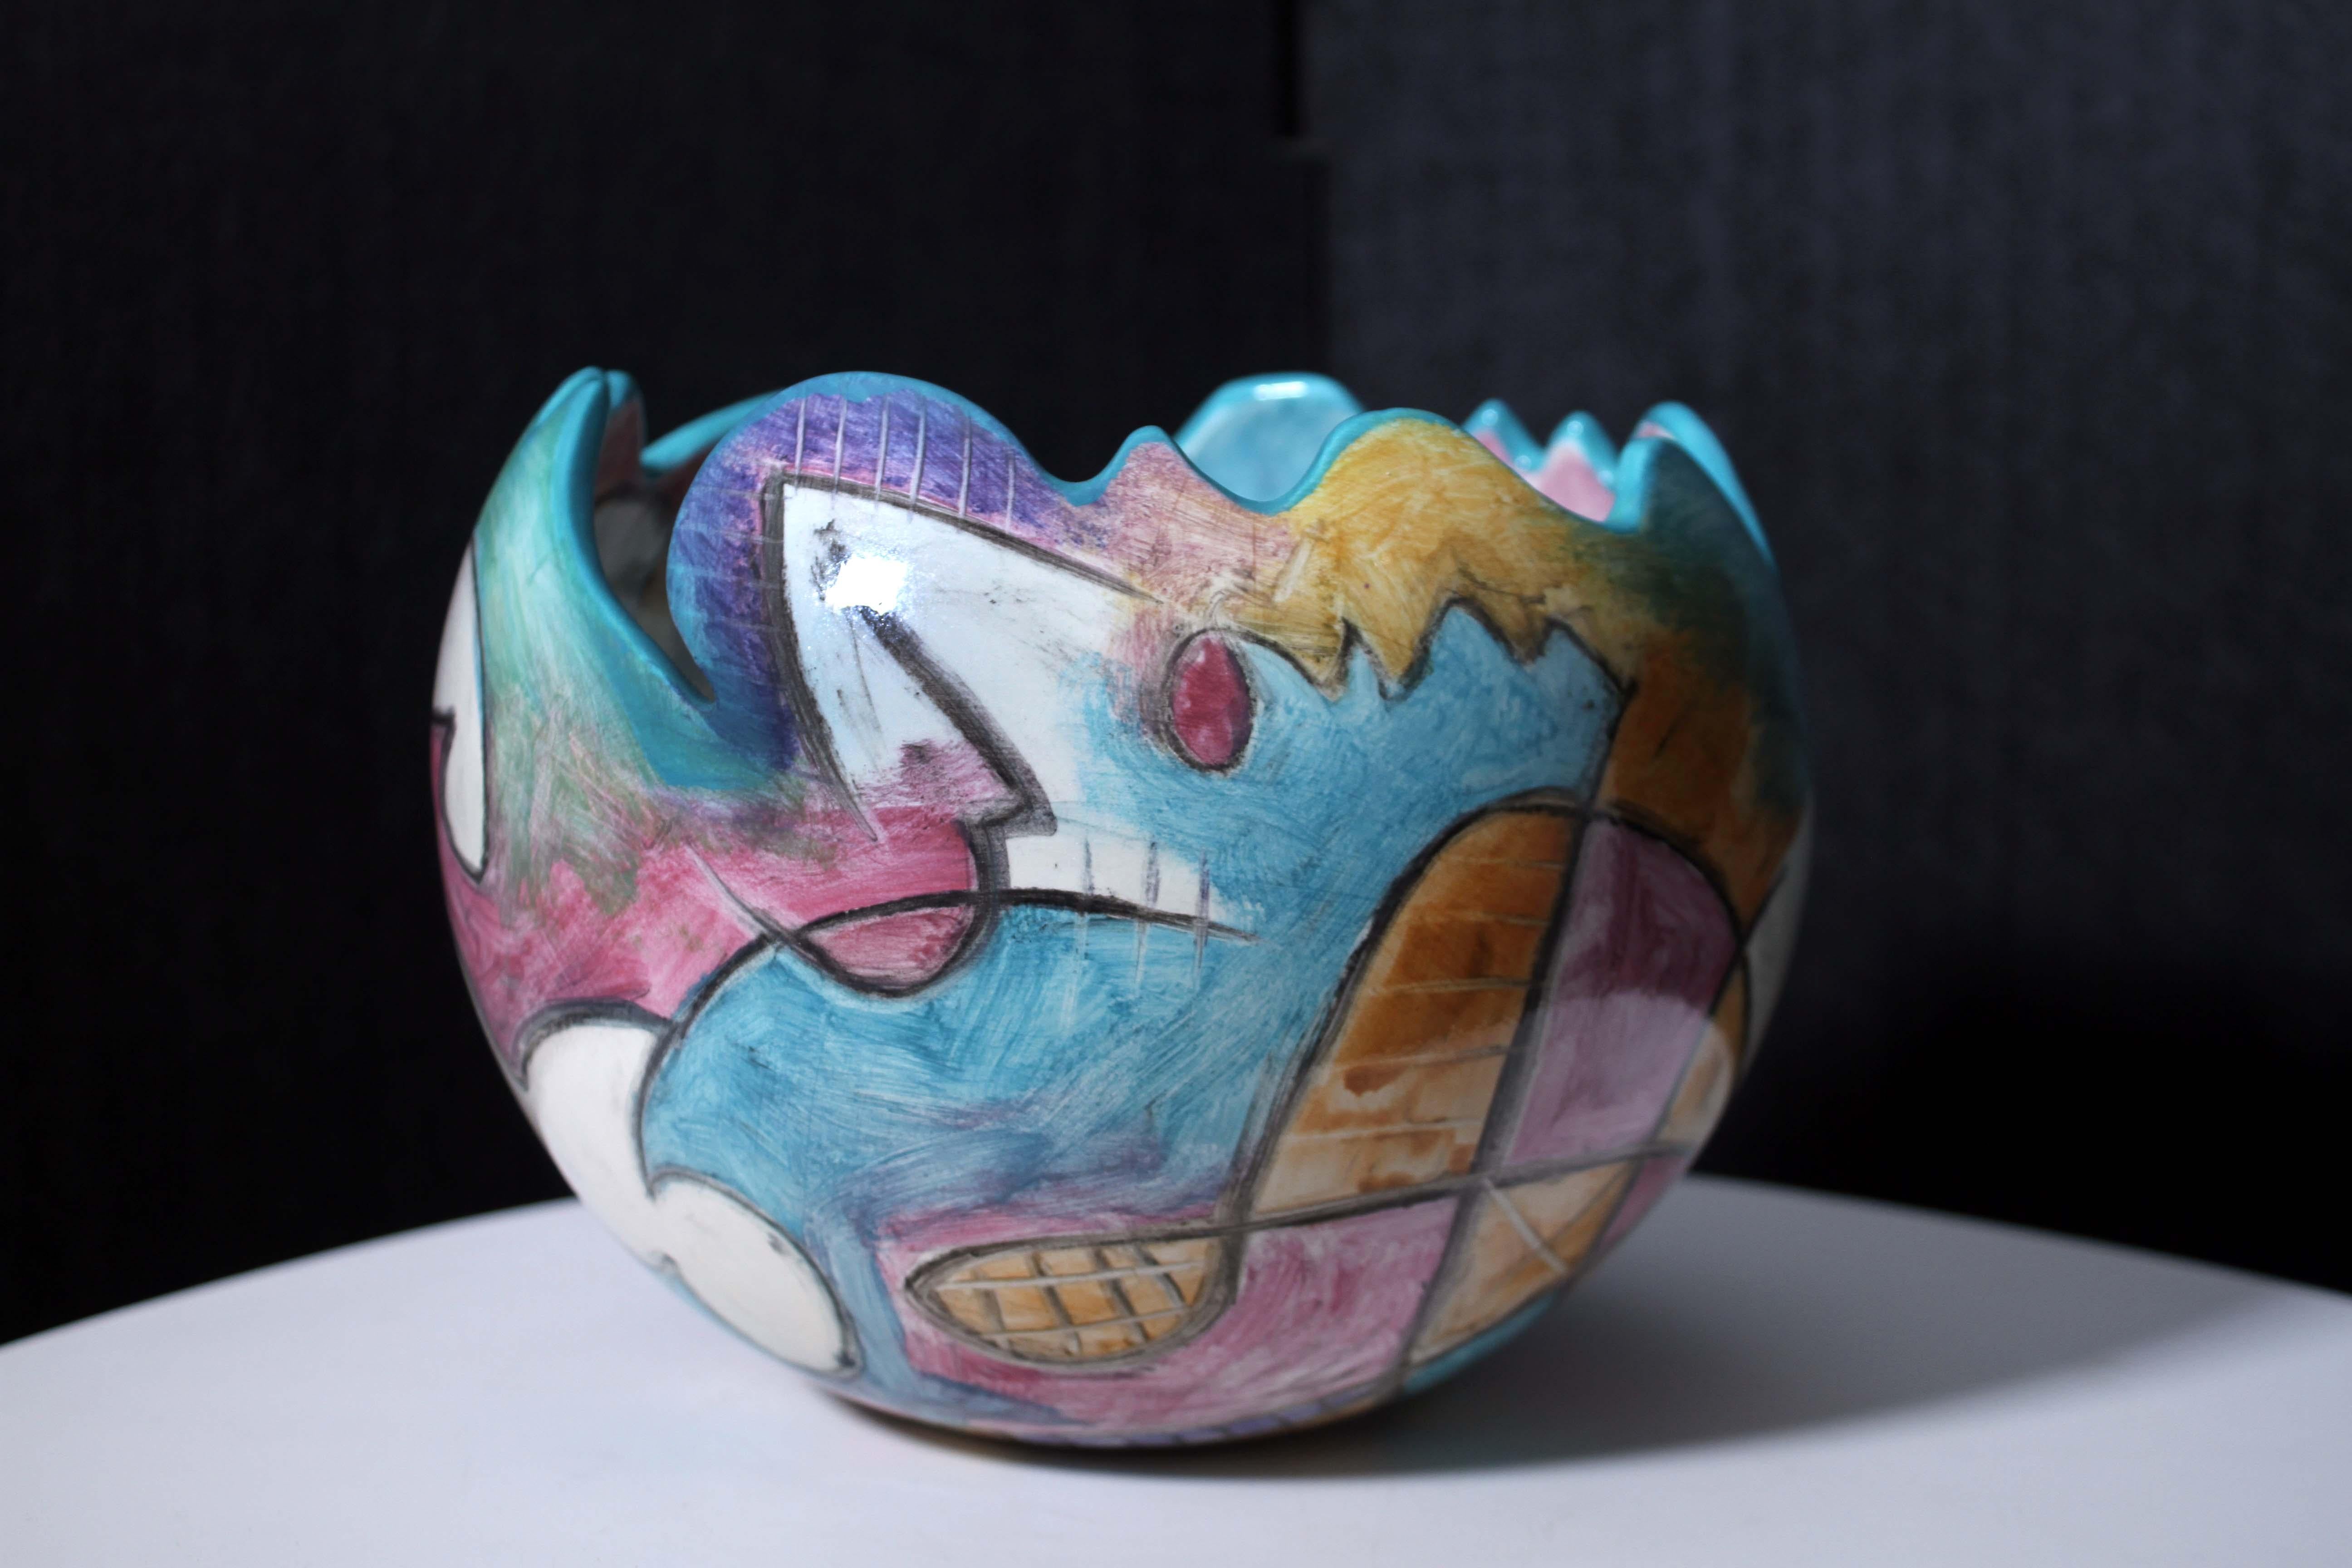 A delightful vintage abstract cubist style terracotta pottery bowl by Harris-Cies Studio. Signed on the bottom with a 1996 date. Made from earthenware clay with airbrushed color and a clear glaze. Stunning geometric patterns in pastel colors makes a